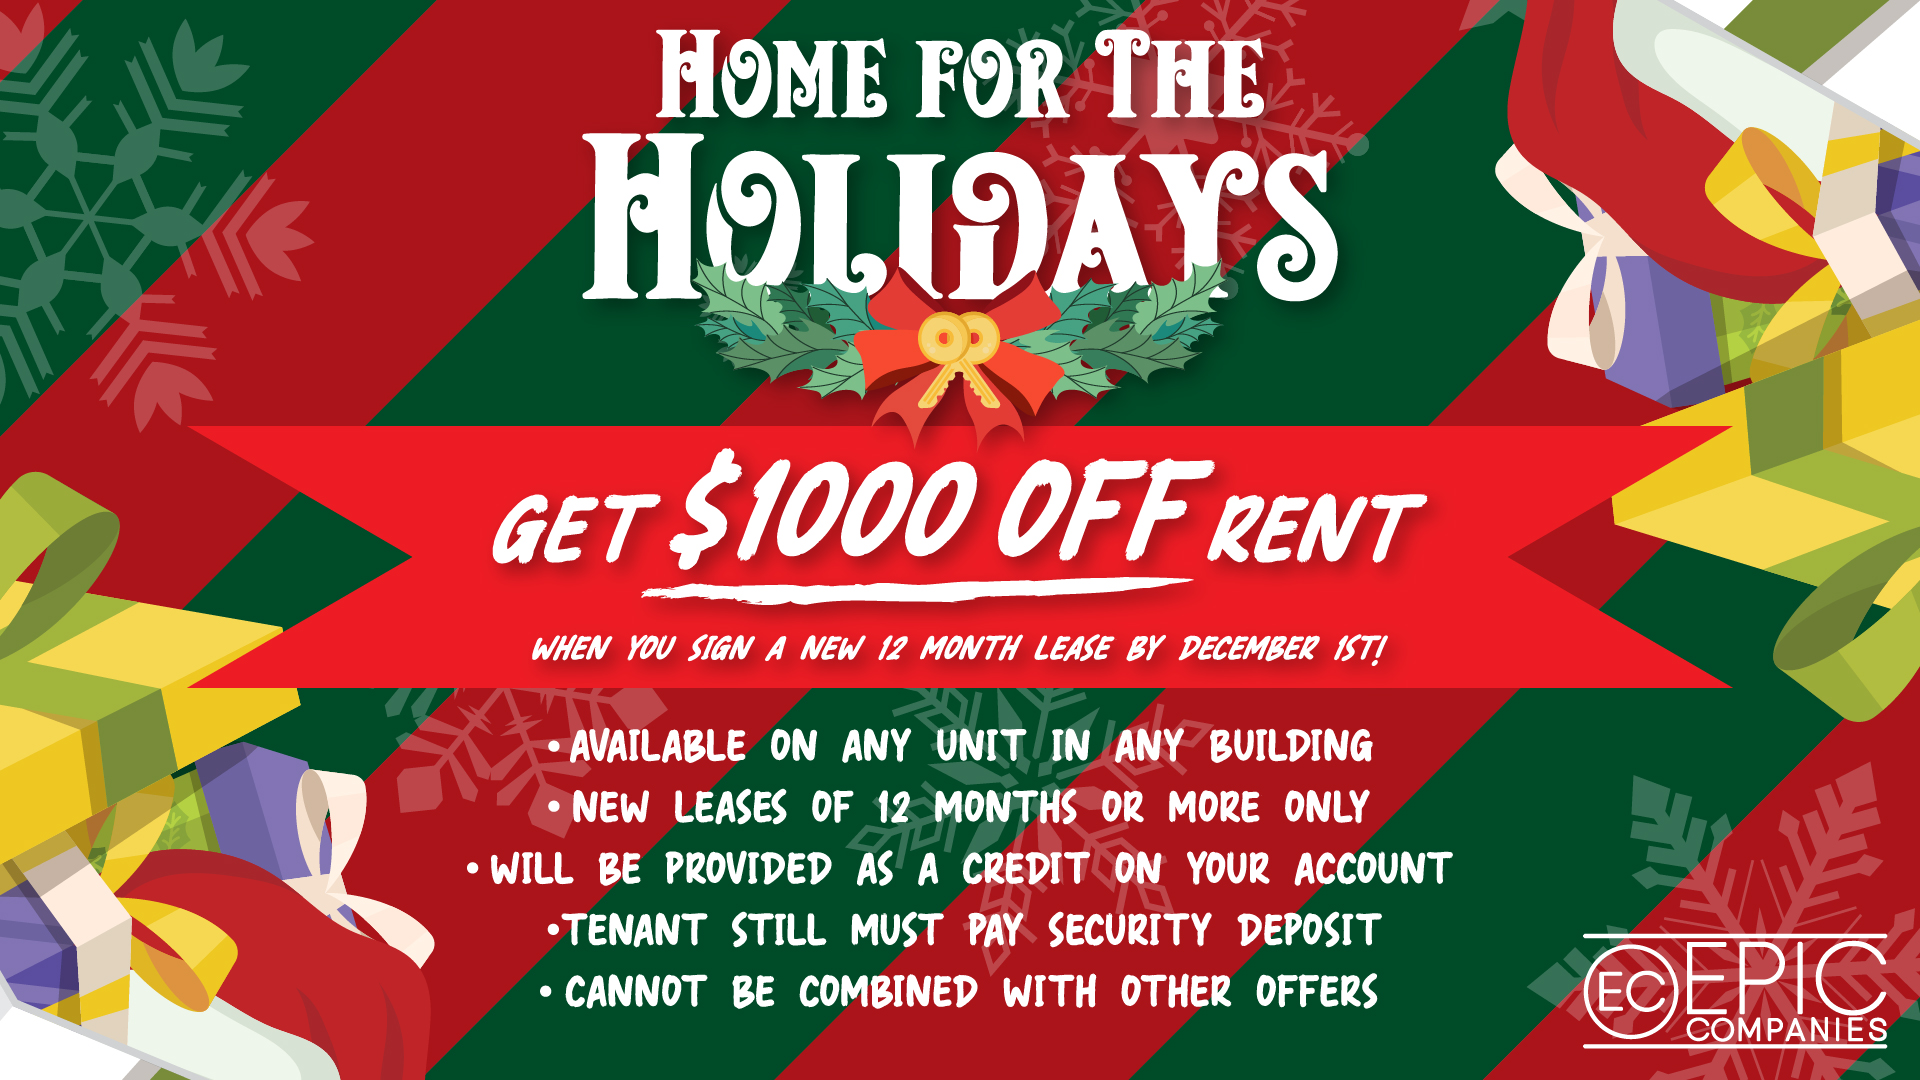 New home for the holidays leasing special